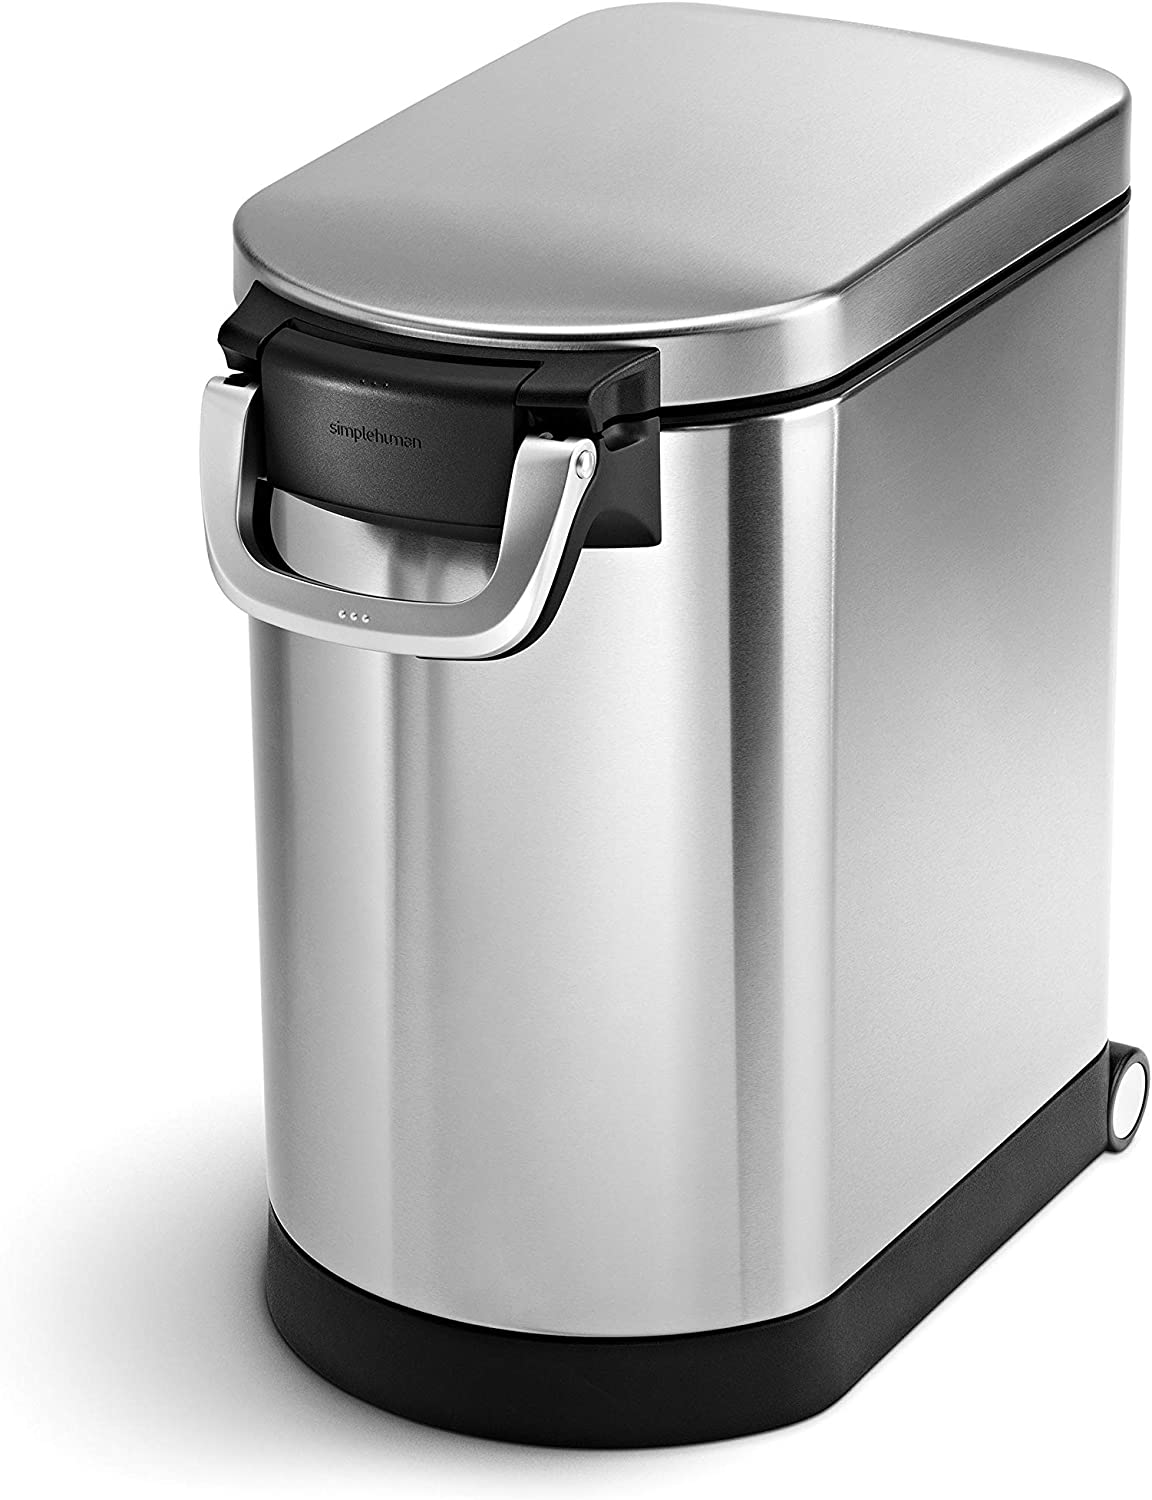 Our Favorite Products for Dog Owners: Simplehuman 25L Pet Food Storage Container